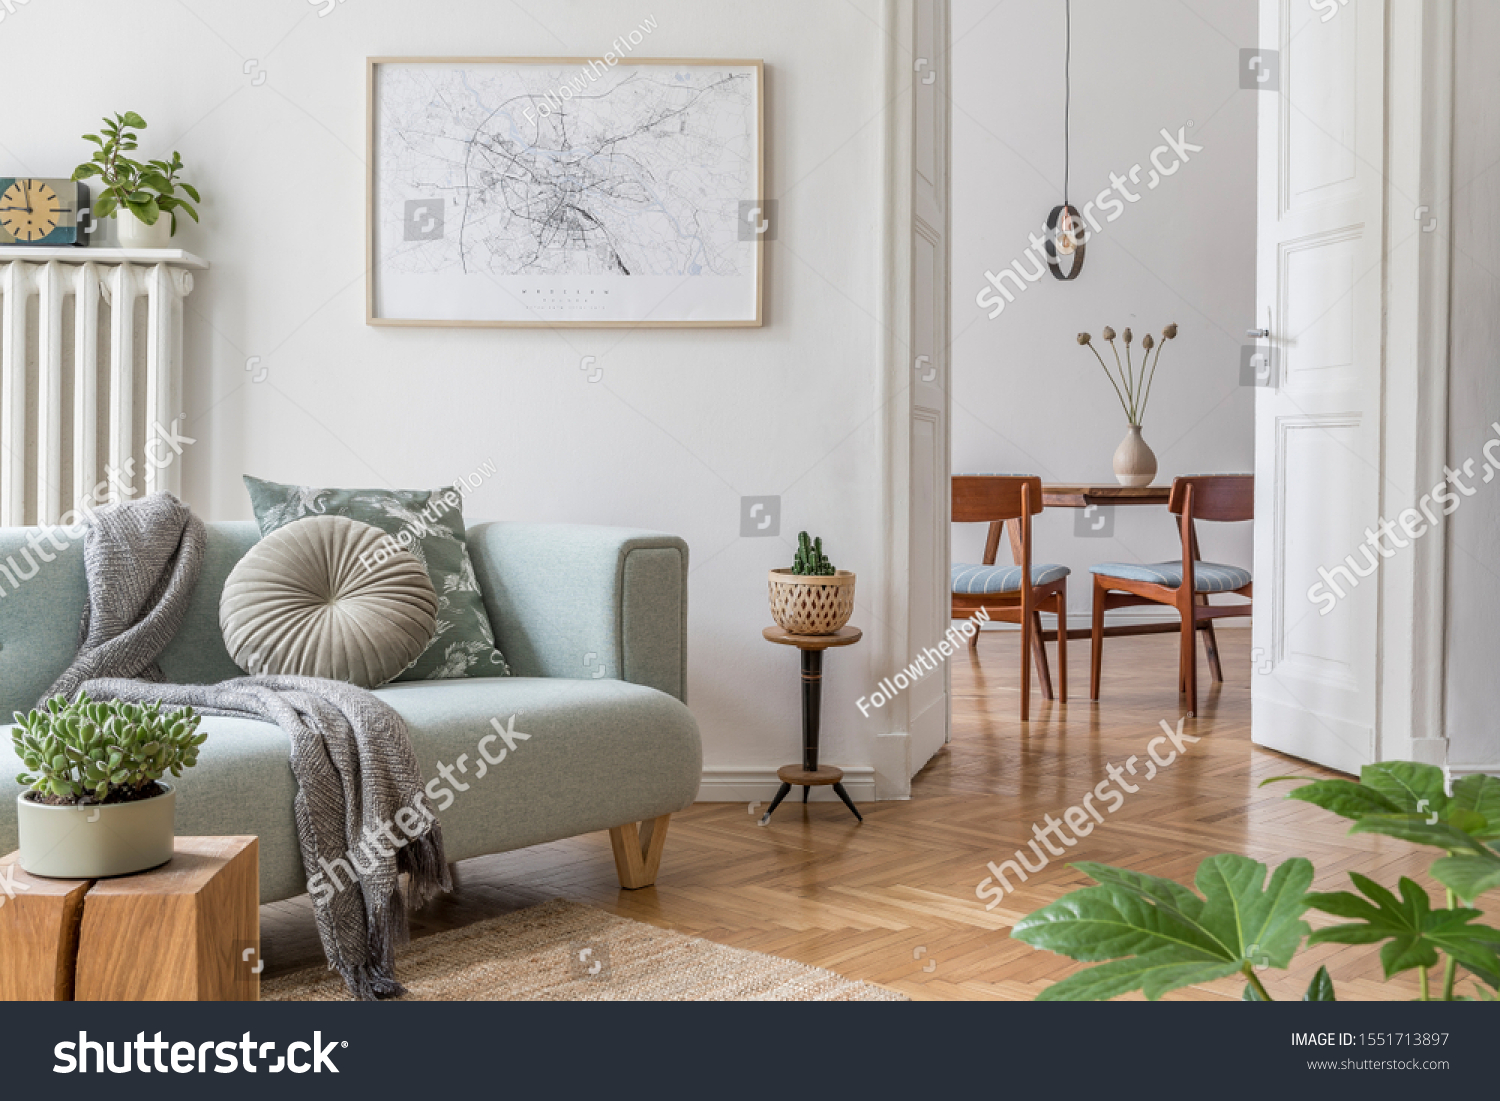 Stylish scandinavian living room and dining room with design mint sofa, mock up poster map, plants and elegant personal accessories. Modern home decor. Open space. Template. Ready to use.  #1551713897